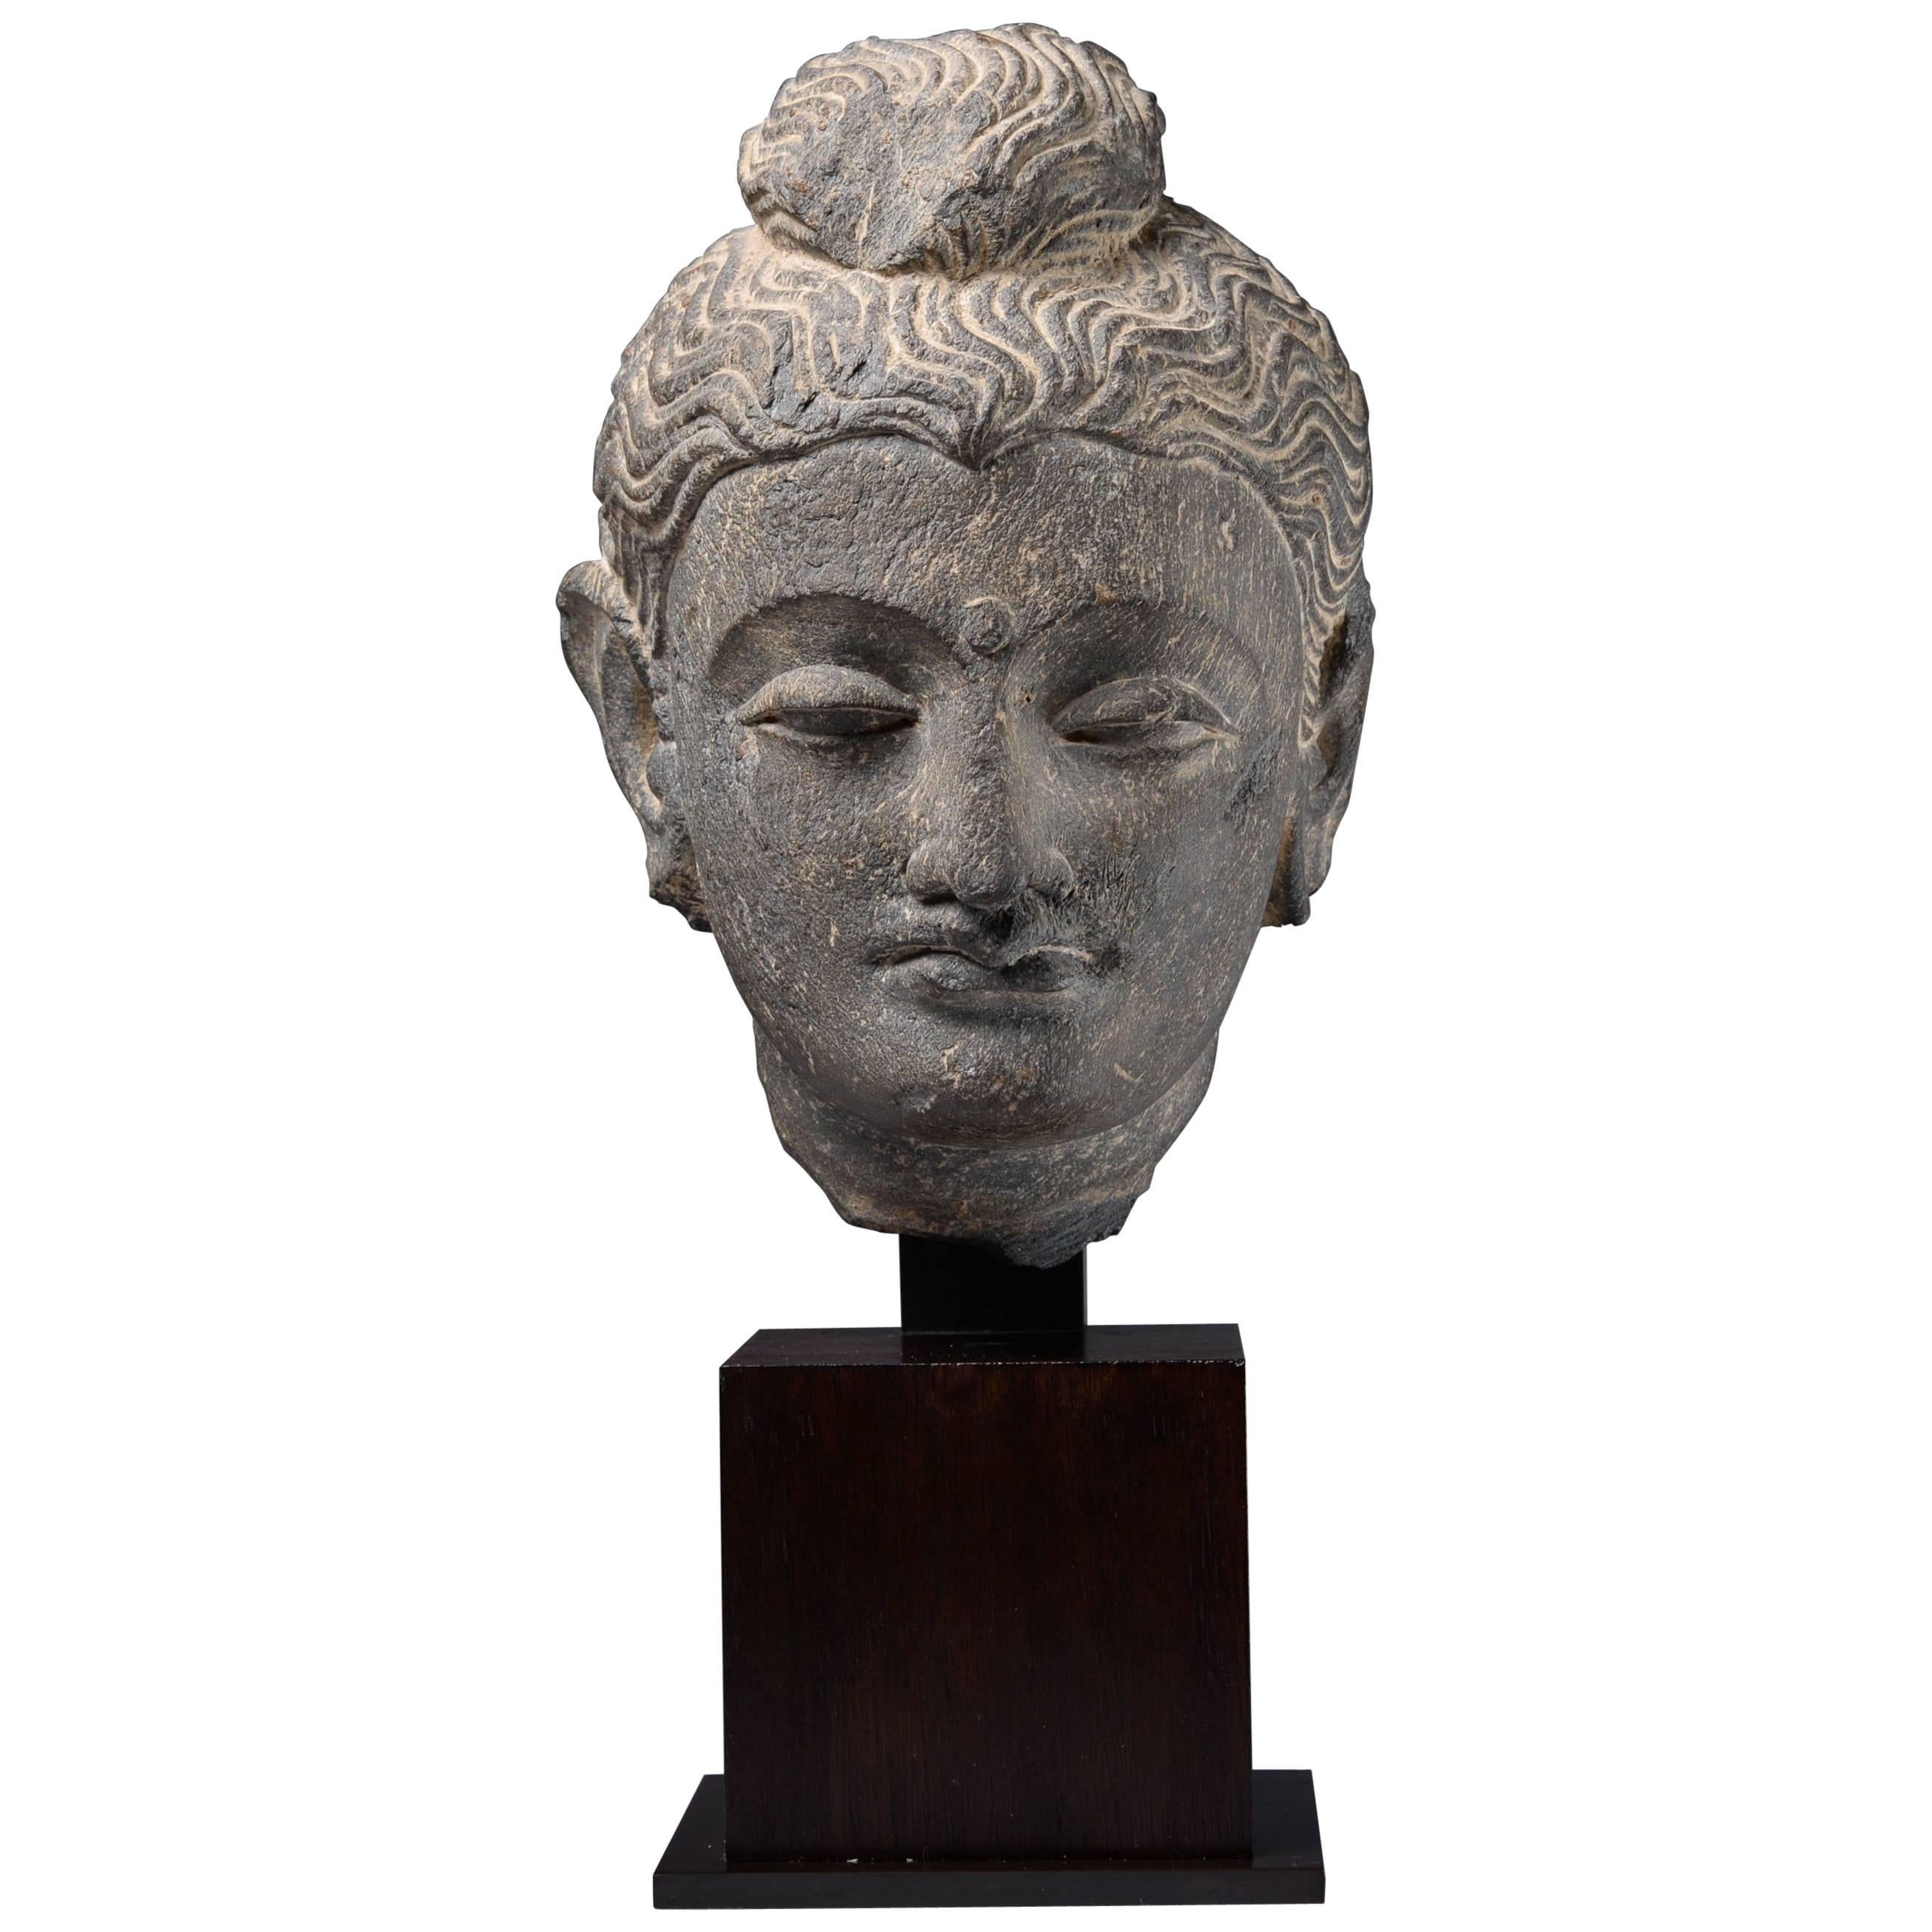 A finely carved and well-provenanced stone head of the Buddha from Gandhara, dating to the 3rd century AD.

Gandhara, the land of contrasts nestled in the snowy peaks and lush valleys of the Hindu Kush, was an ancient meeting place between East and